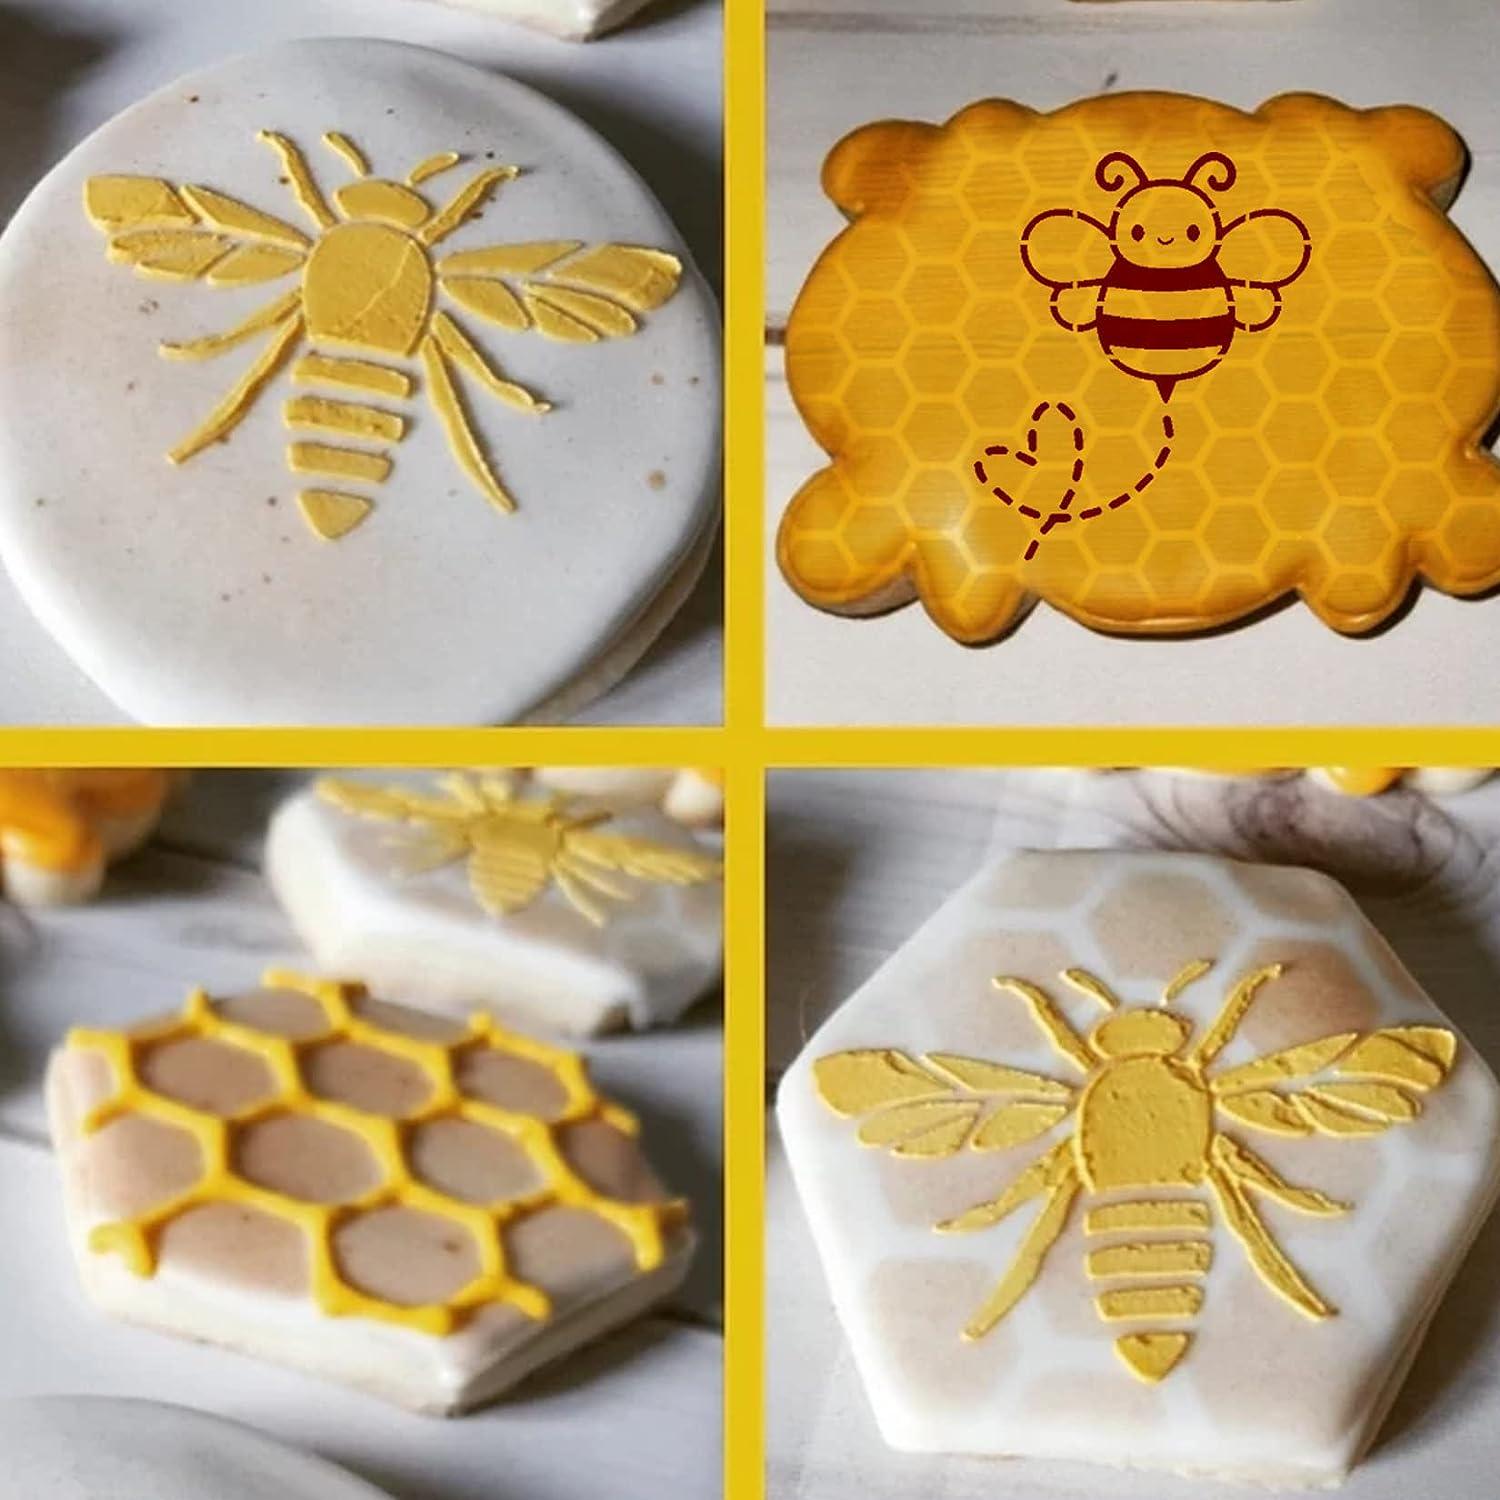 Honeycomb Stencil  Bee's Baked Art Supplies and Artfully Designed